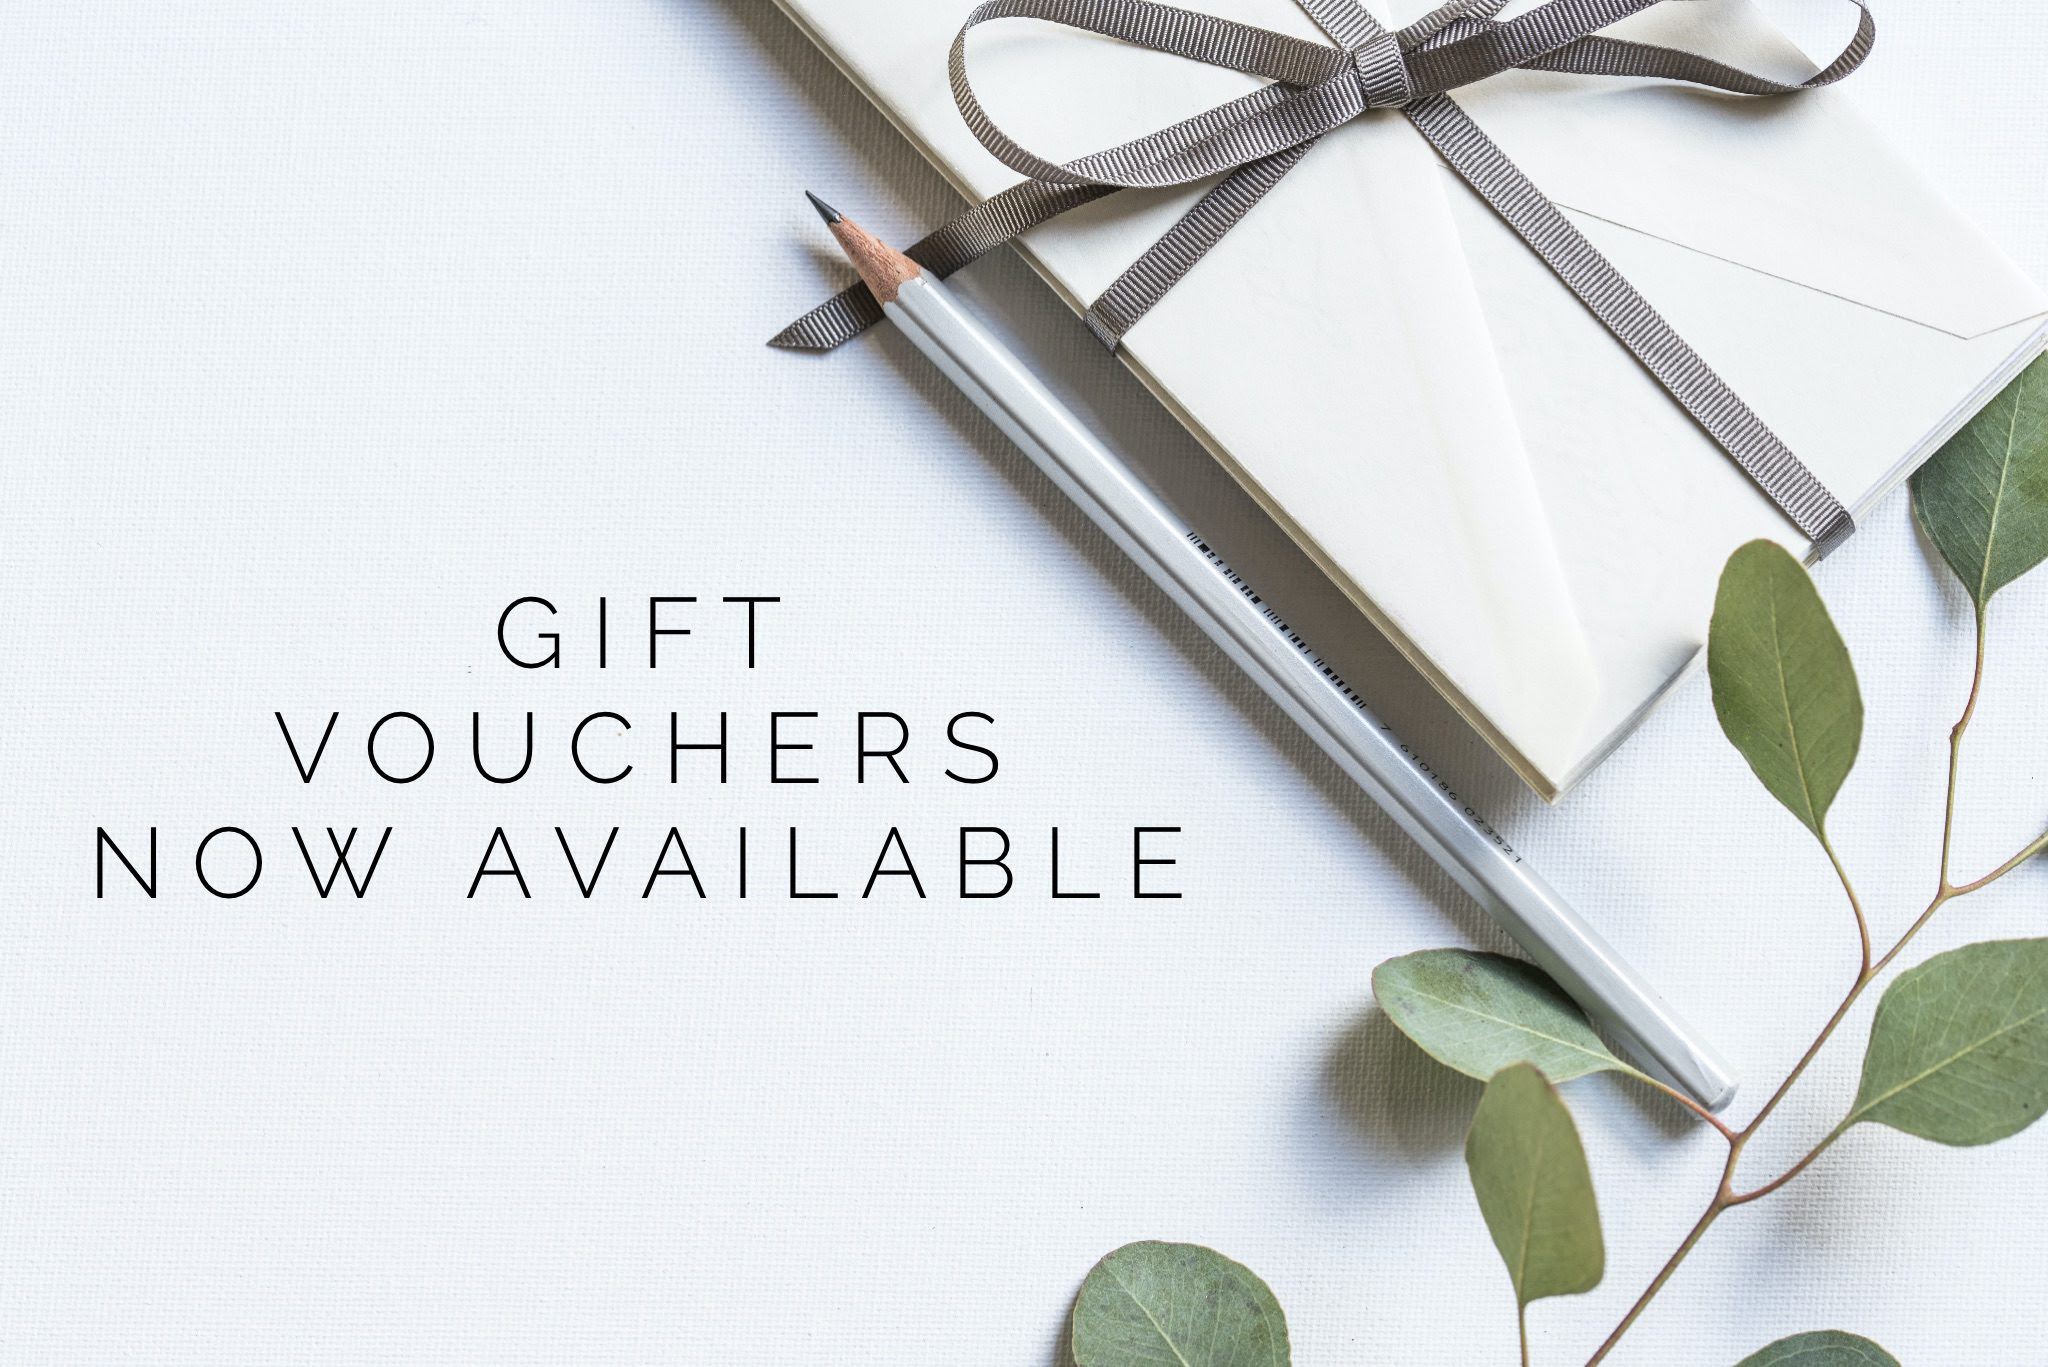 Give the gift of a gift voucher